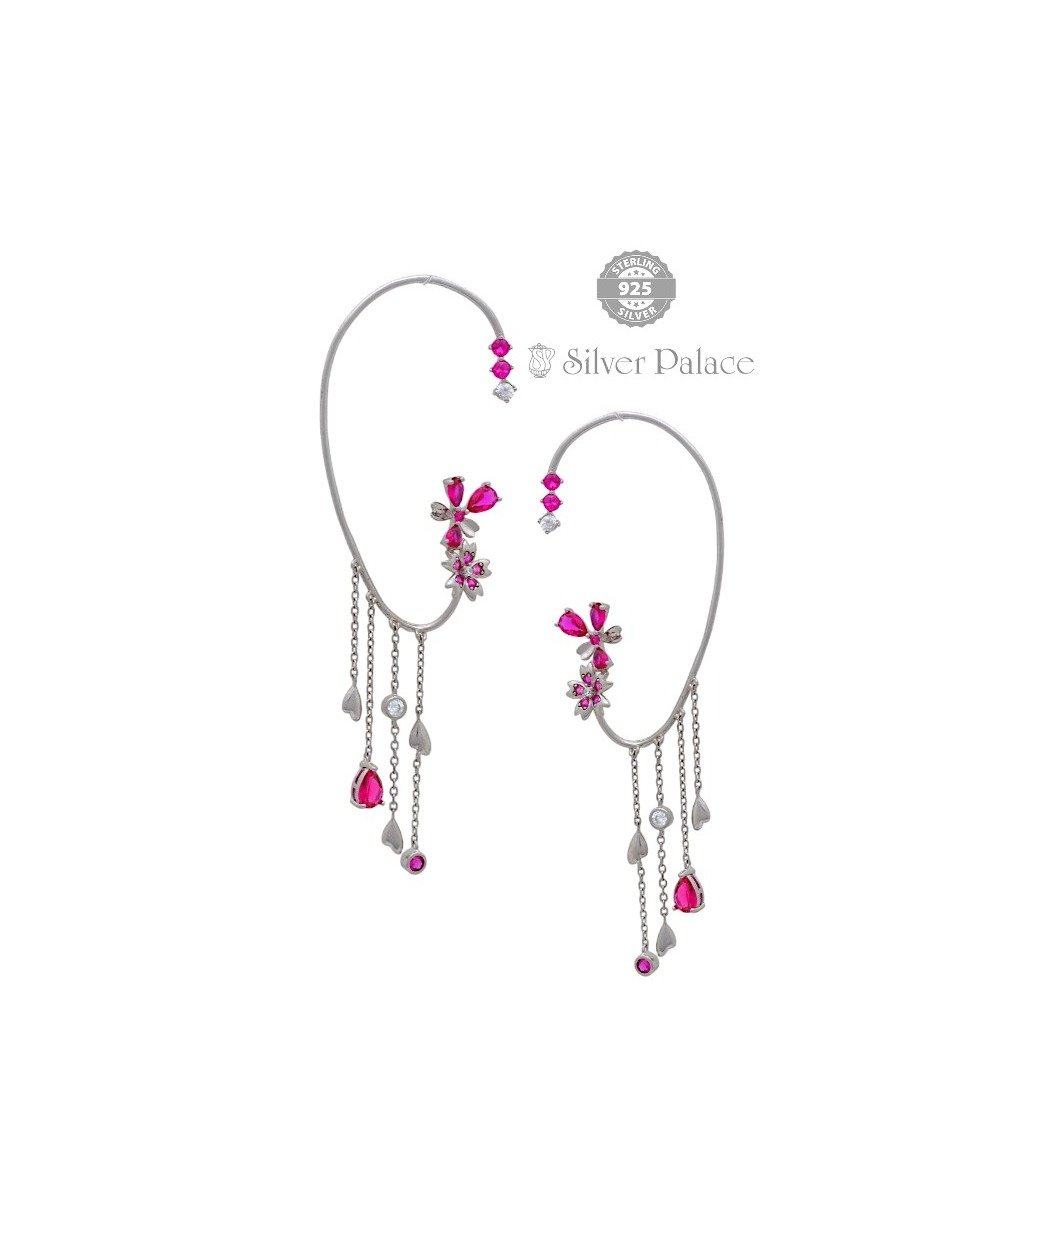 92.5 Pure Silver Pink Rose Bridal Cuff Earrings For Girls